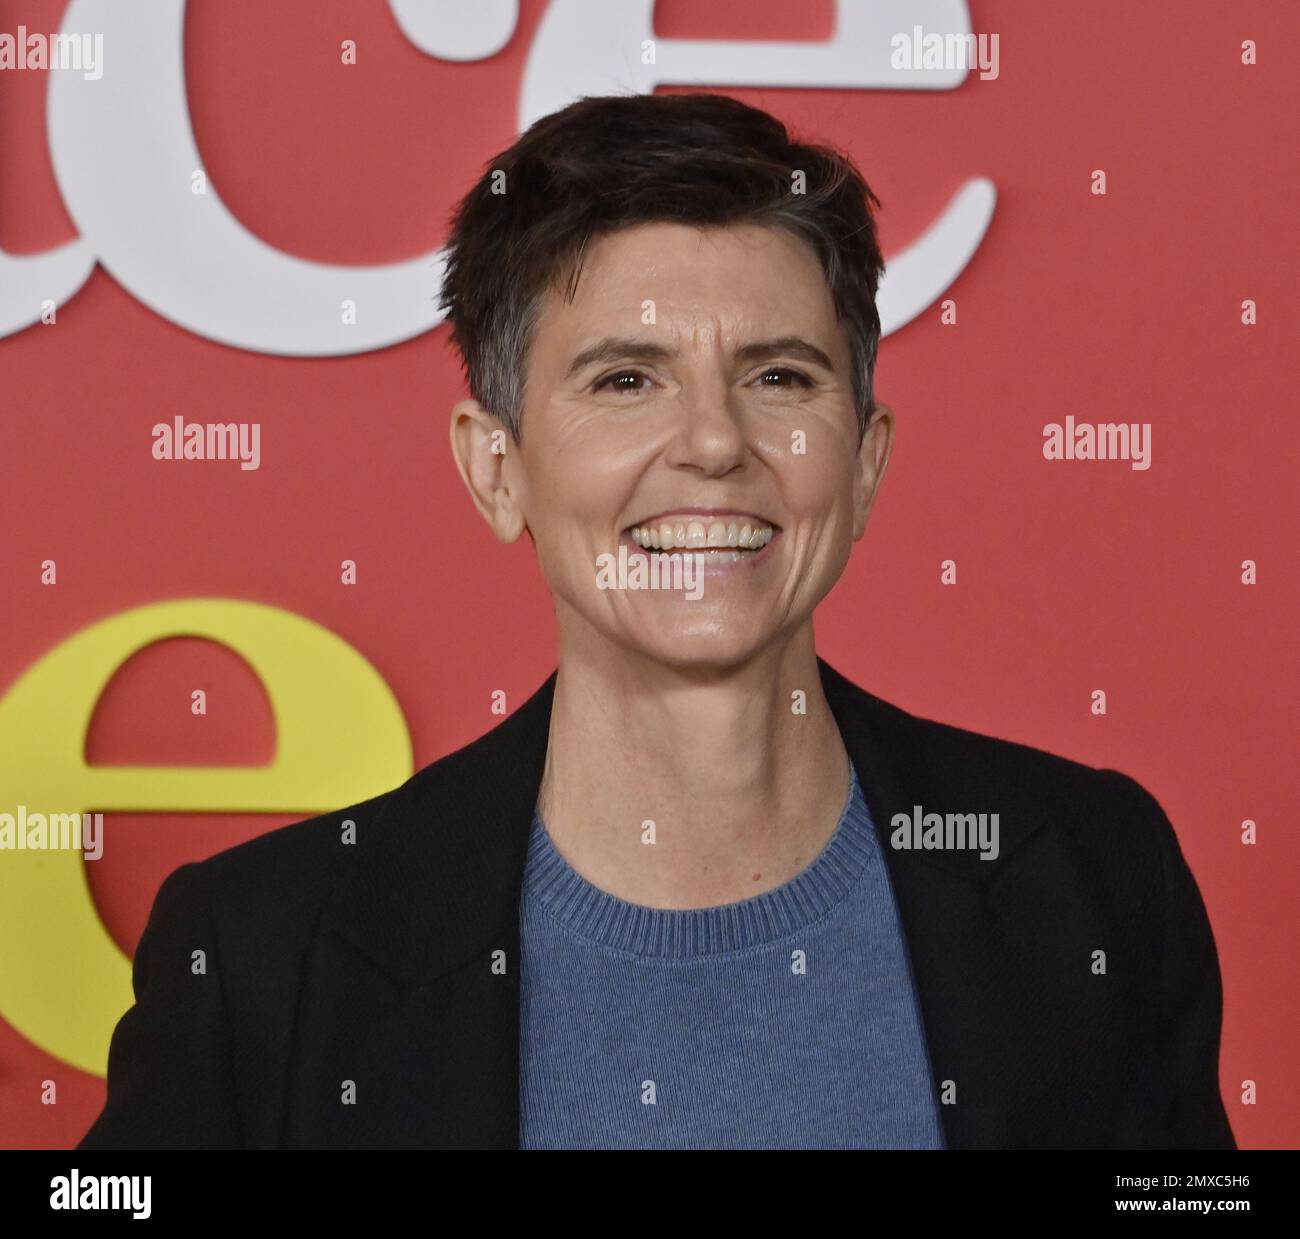 Los Angeles, United States. 02nd Feb, 2023. Cast member Tig Notaro attends the premiere of the motion picture romantic comedy "Your Place or Mine" at the Regency Village Theatre in the Westwood section of Los Angeles on Thursday, February 2, 2023. Storyline: Two long-distance best friends change each other's lives when she decides to pursue a lifelong dream and he volunteers to keep an eye on her teenage son. Photo by Jim Ruymen/UPI Credit: UPI/Alamy Live News Stock Photo